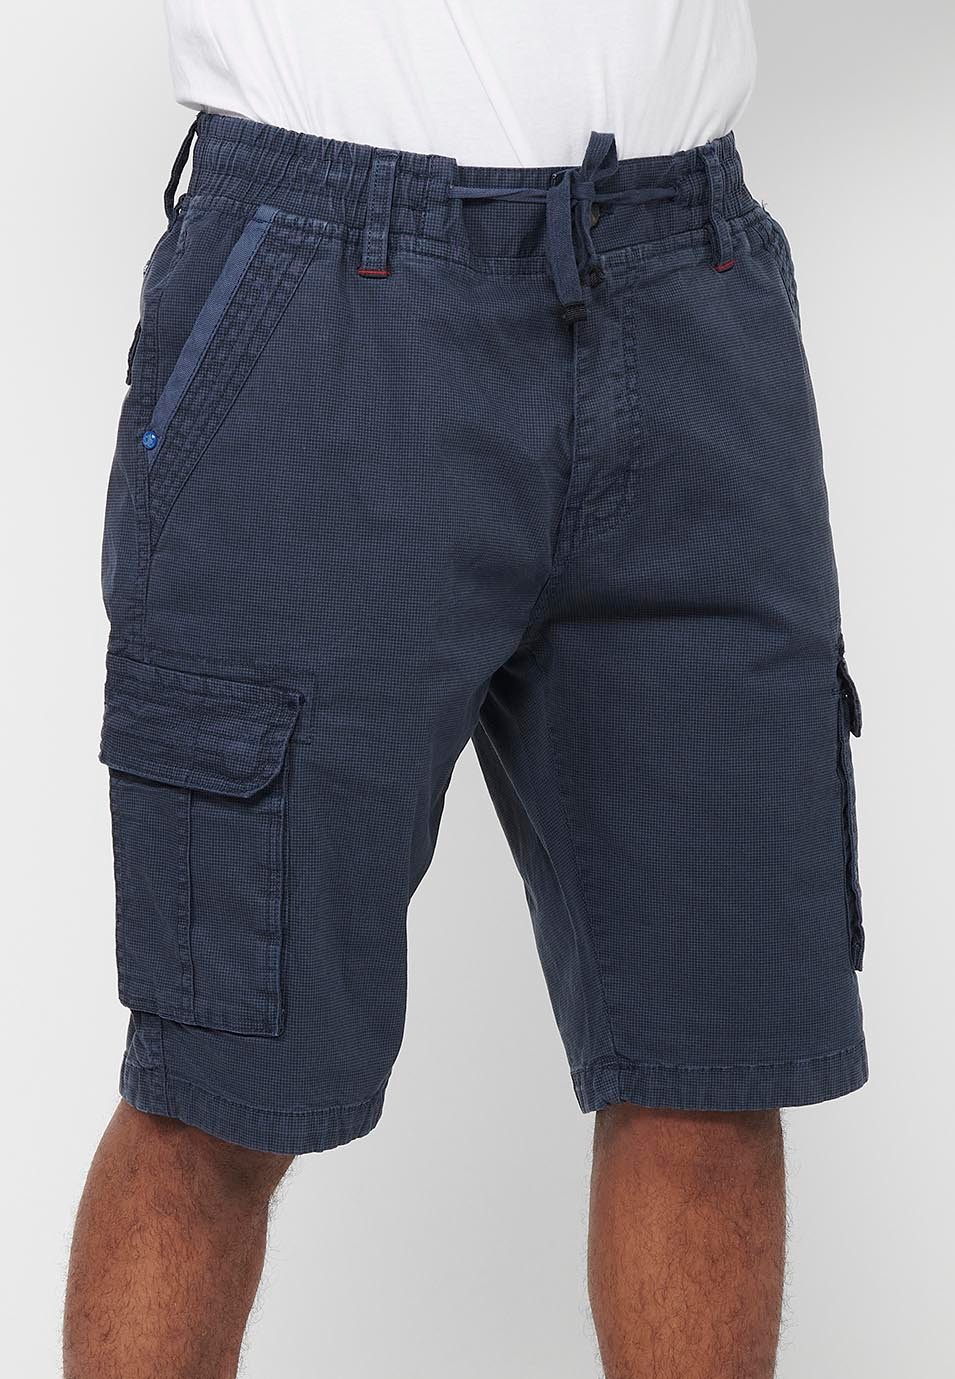 Cargo shorts with front closure with zipper and button and four pockets, two rear pockets with flap with two cargo pockets with flap and adjustable waist with drawstring in Navy Color for Men 2